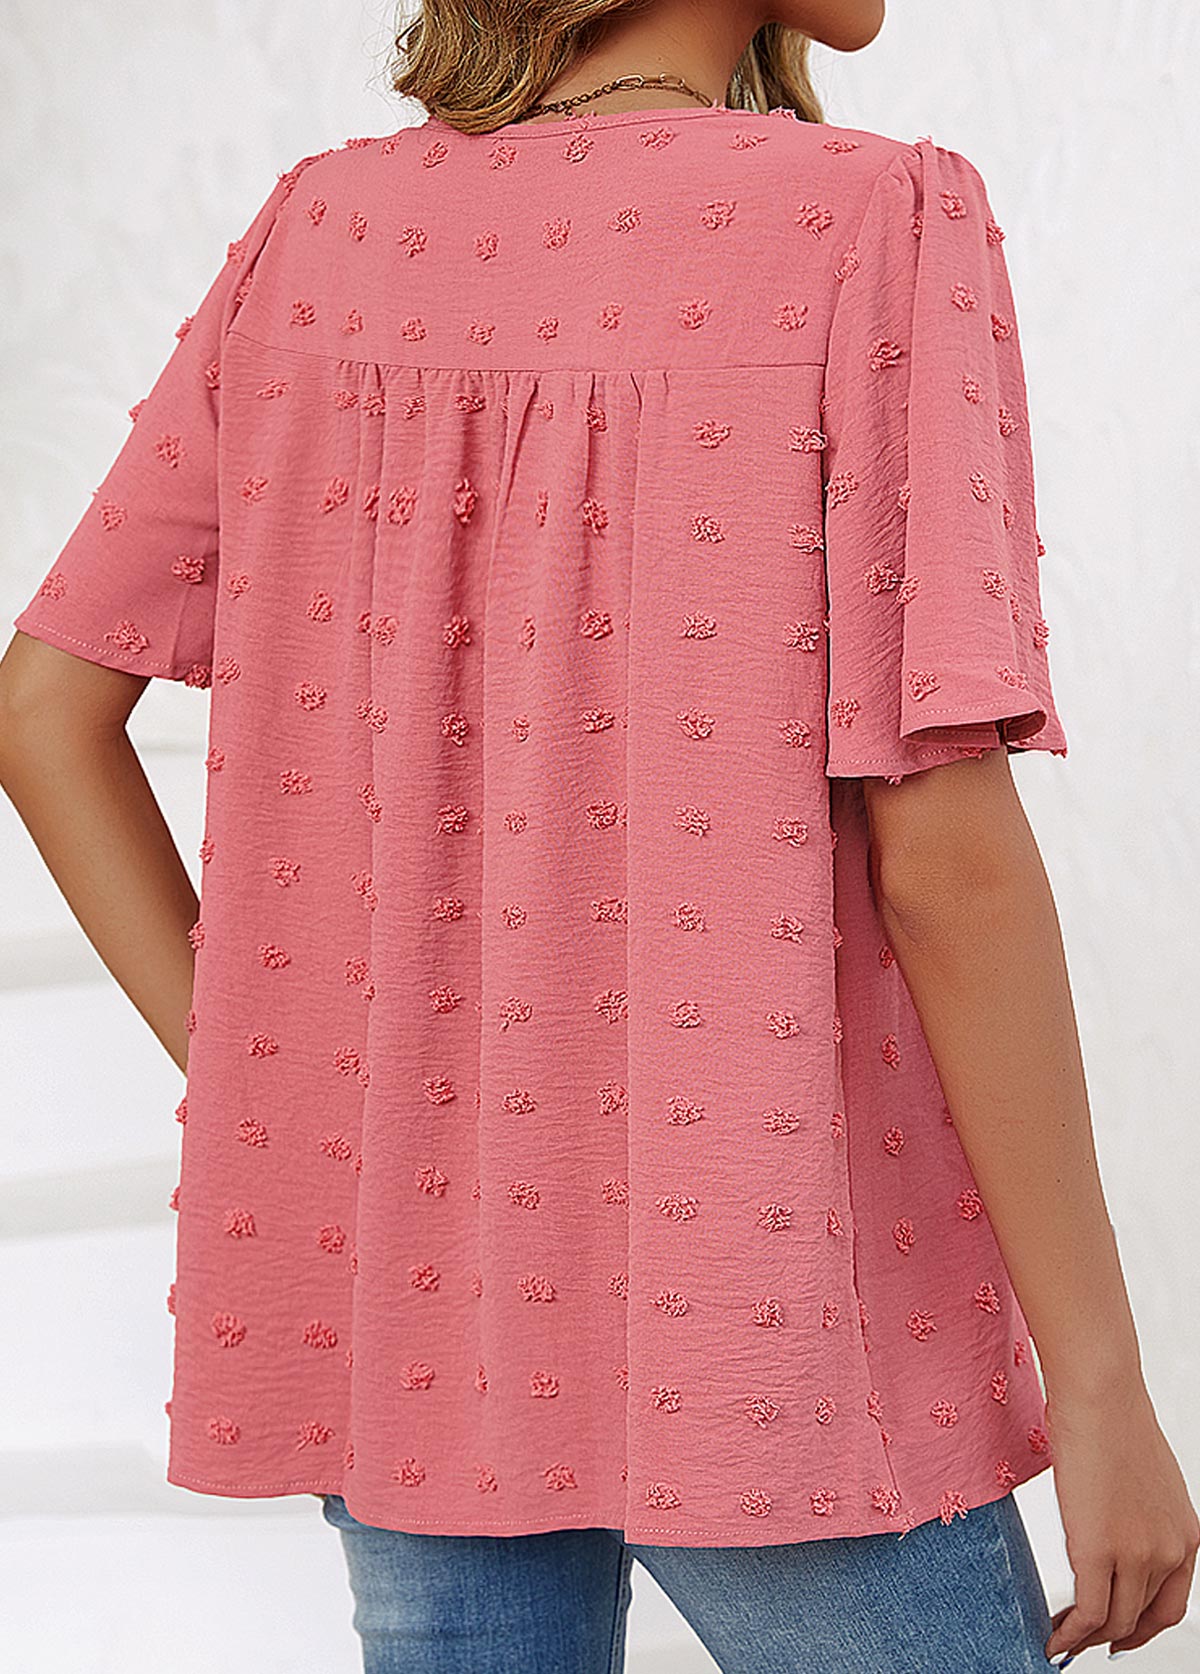 Ruched Round Neck Short Sleeve Pink T Shirt